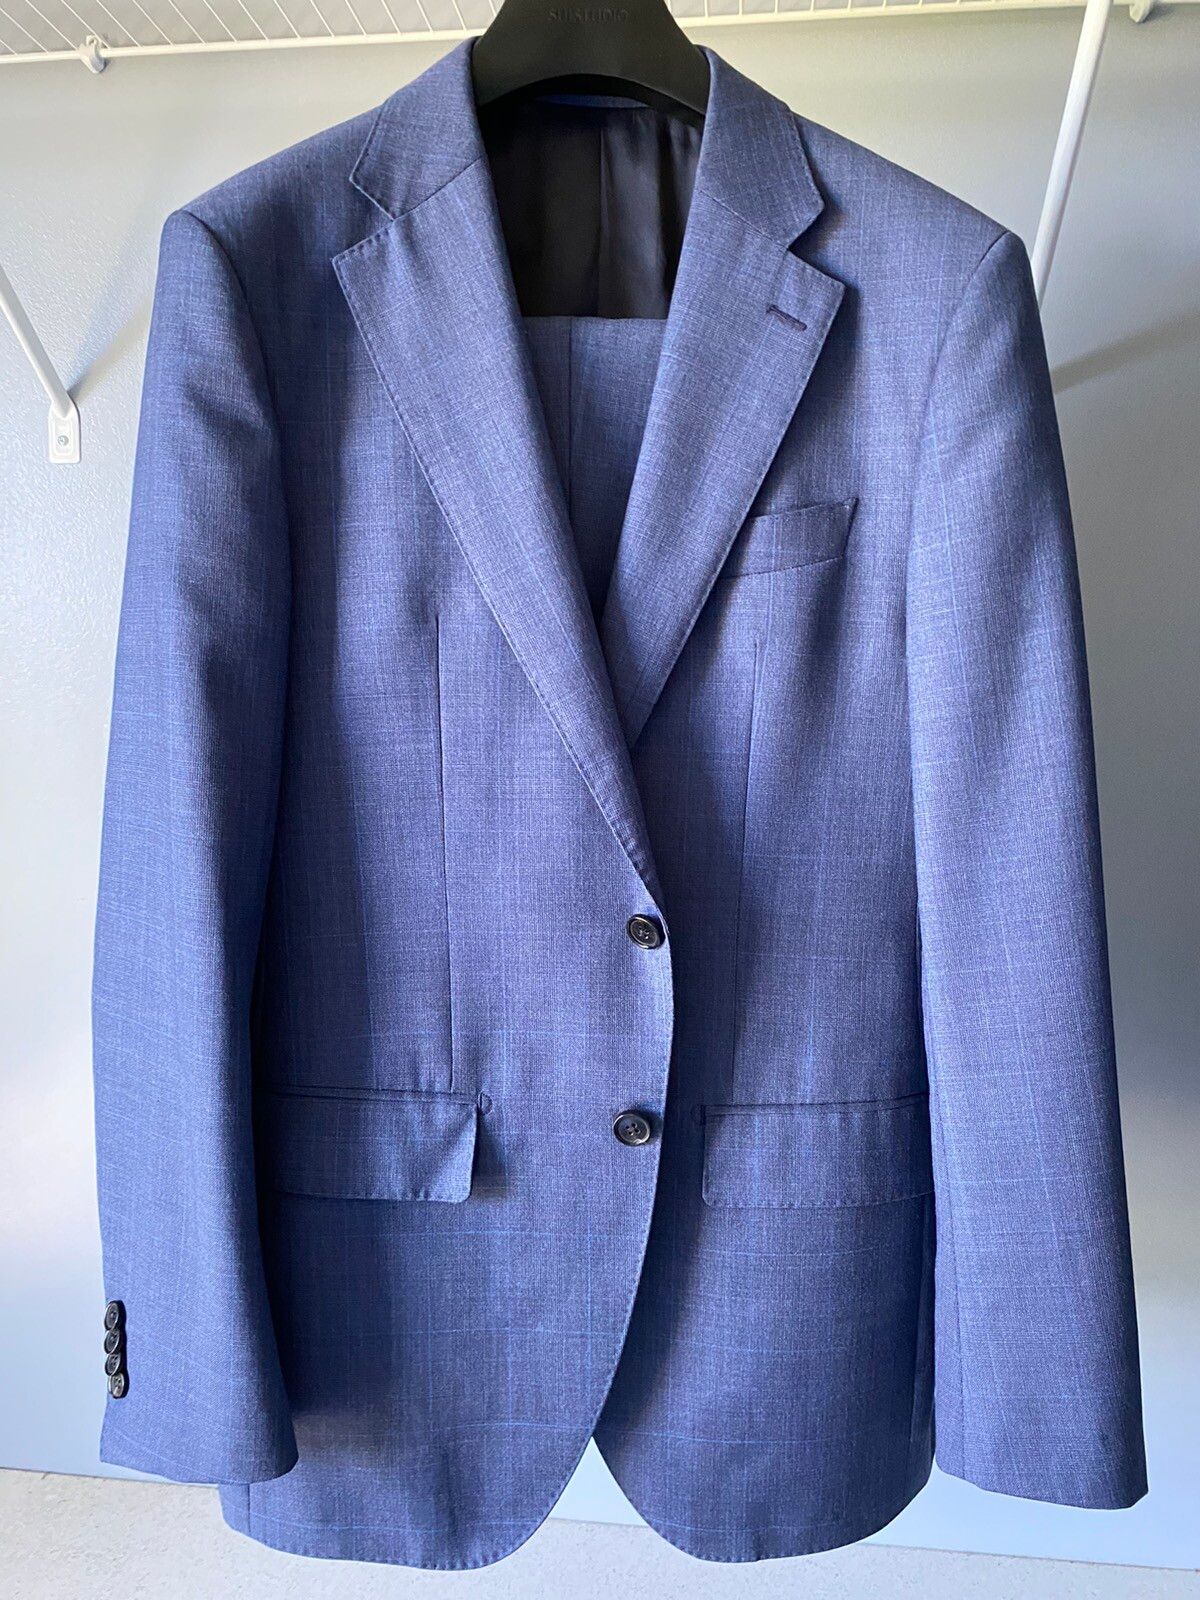 Spier And Mackay Blue Prince of Wales check suit | Grailed